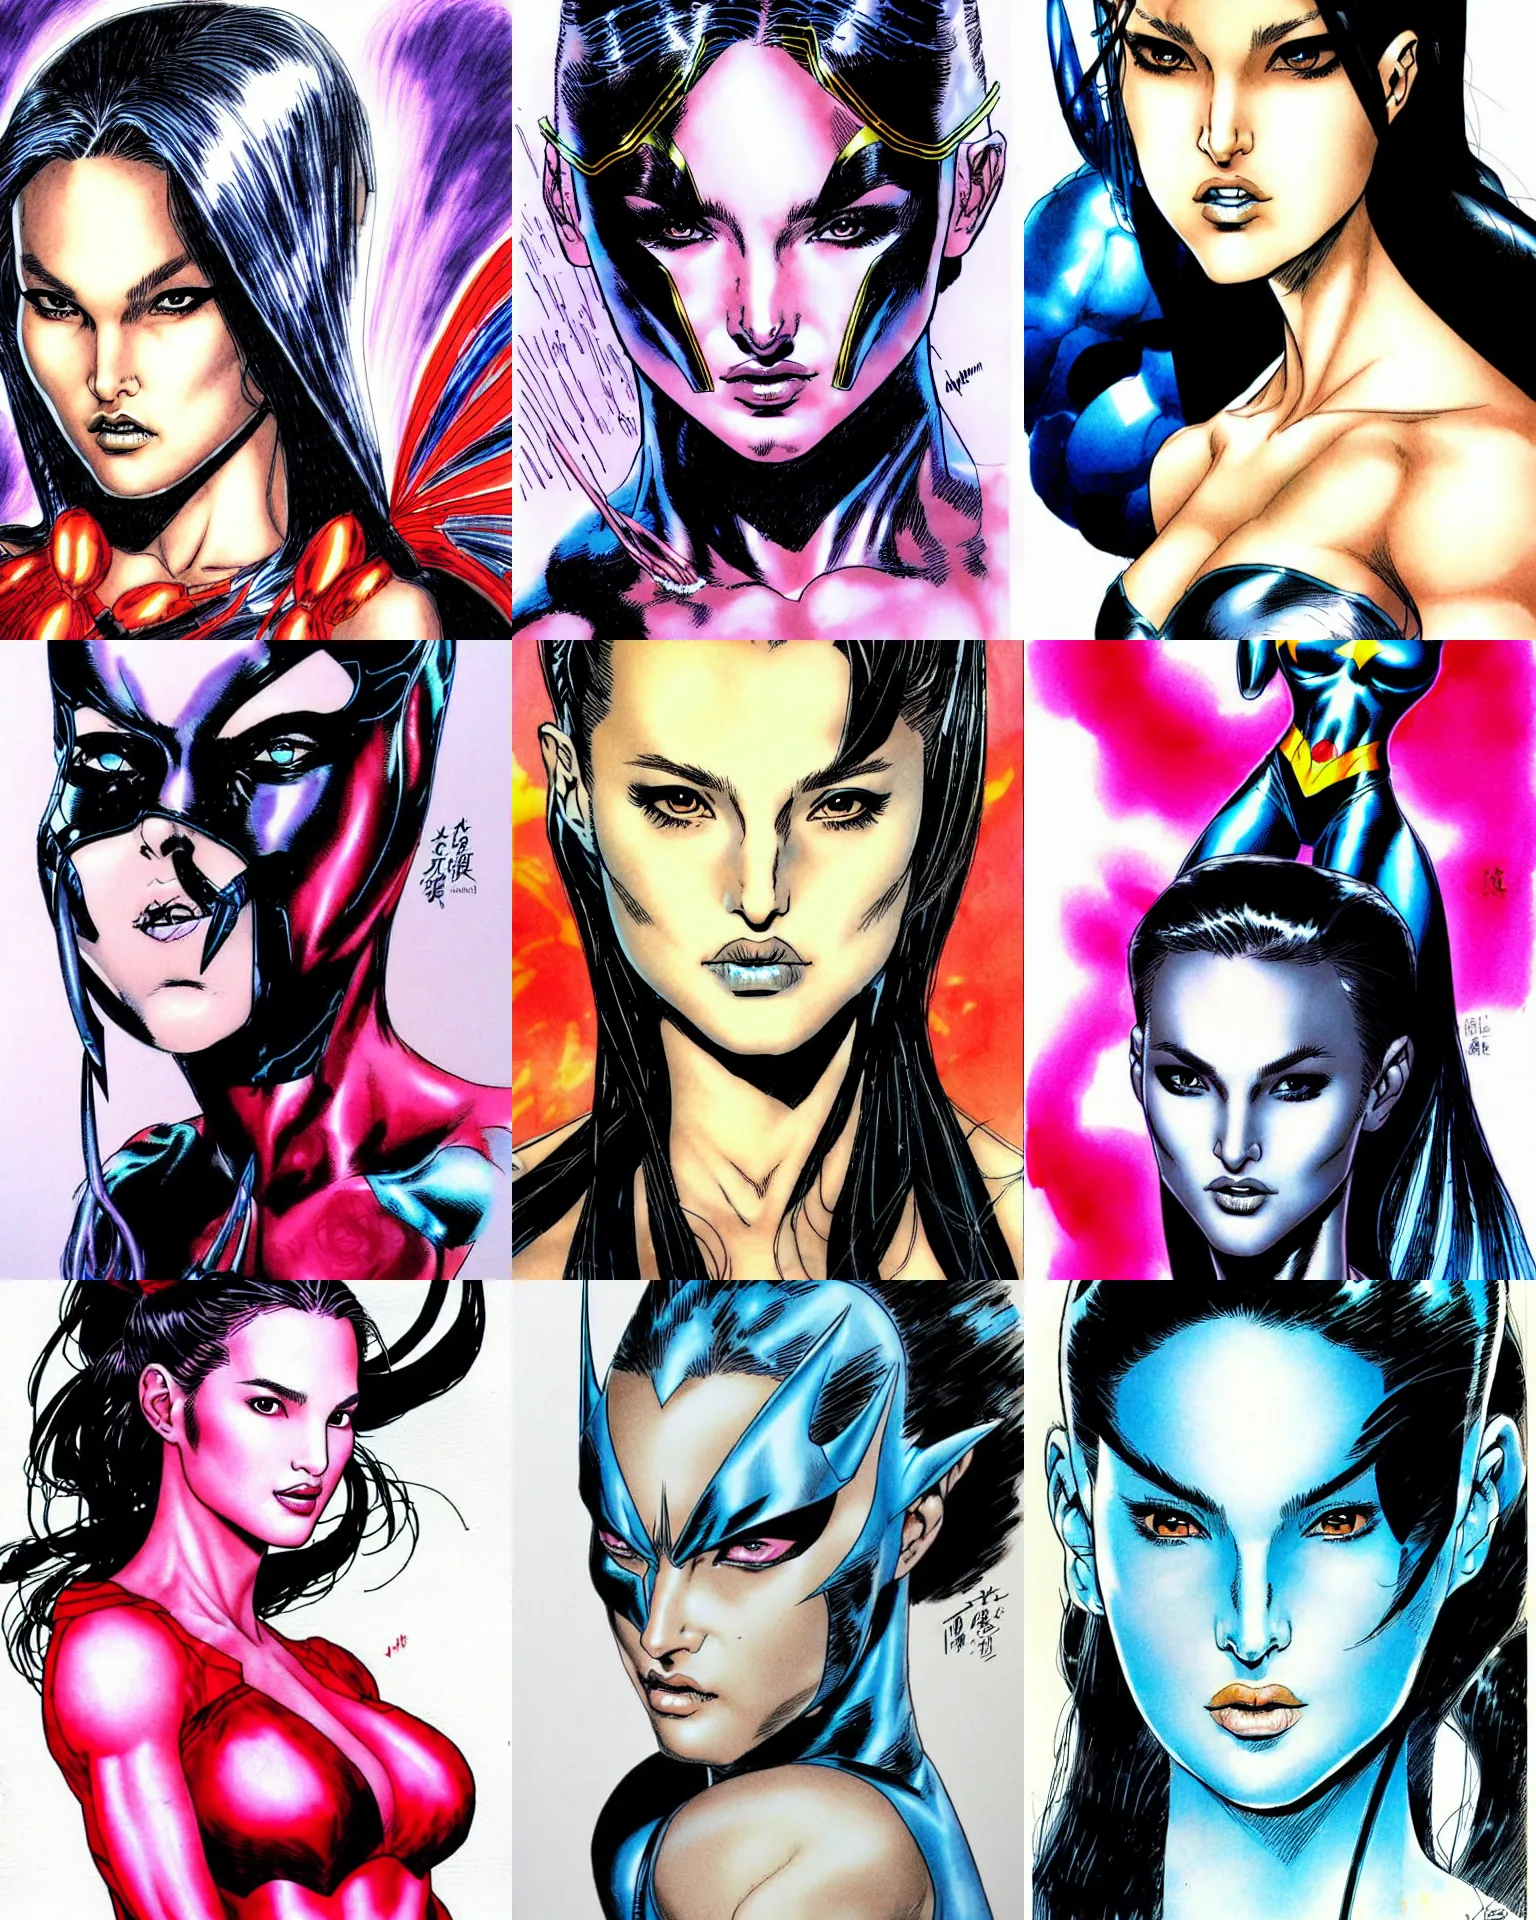 Prompt: jim lee!!! ink colorised airbrushed gouache sketch by jim lee close up headshot of chinese natalie portman as nymph in the style of jim lee, x - men superhero comic book character by jim lee